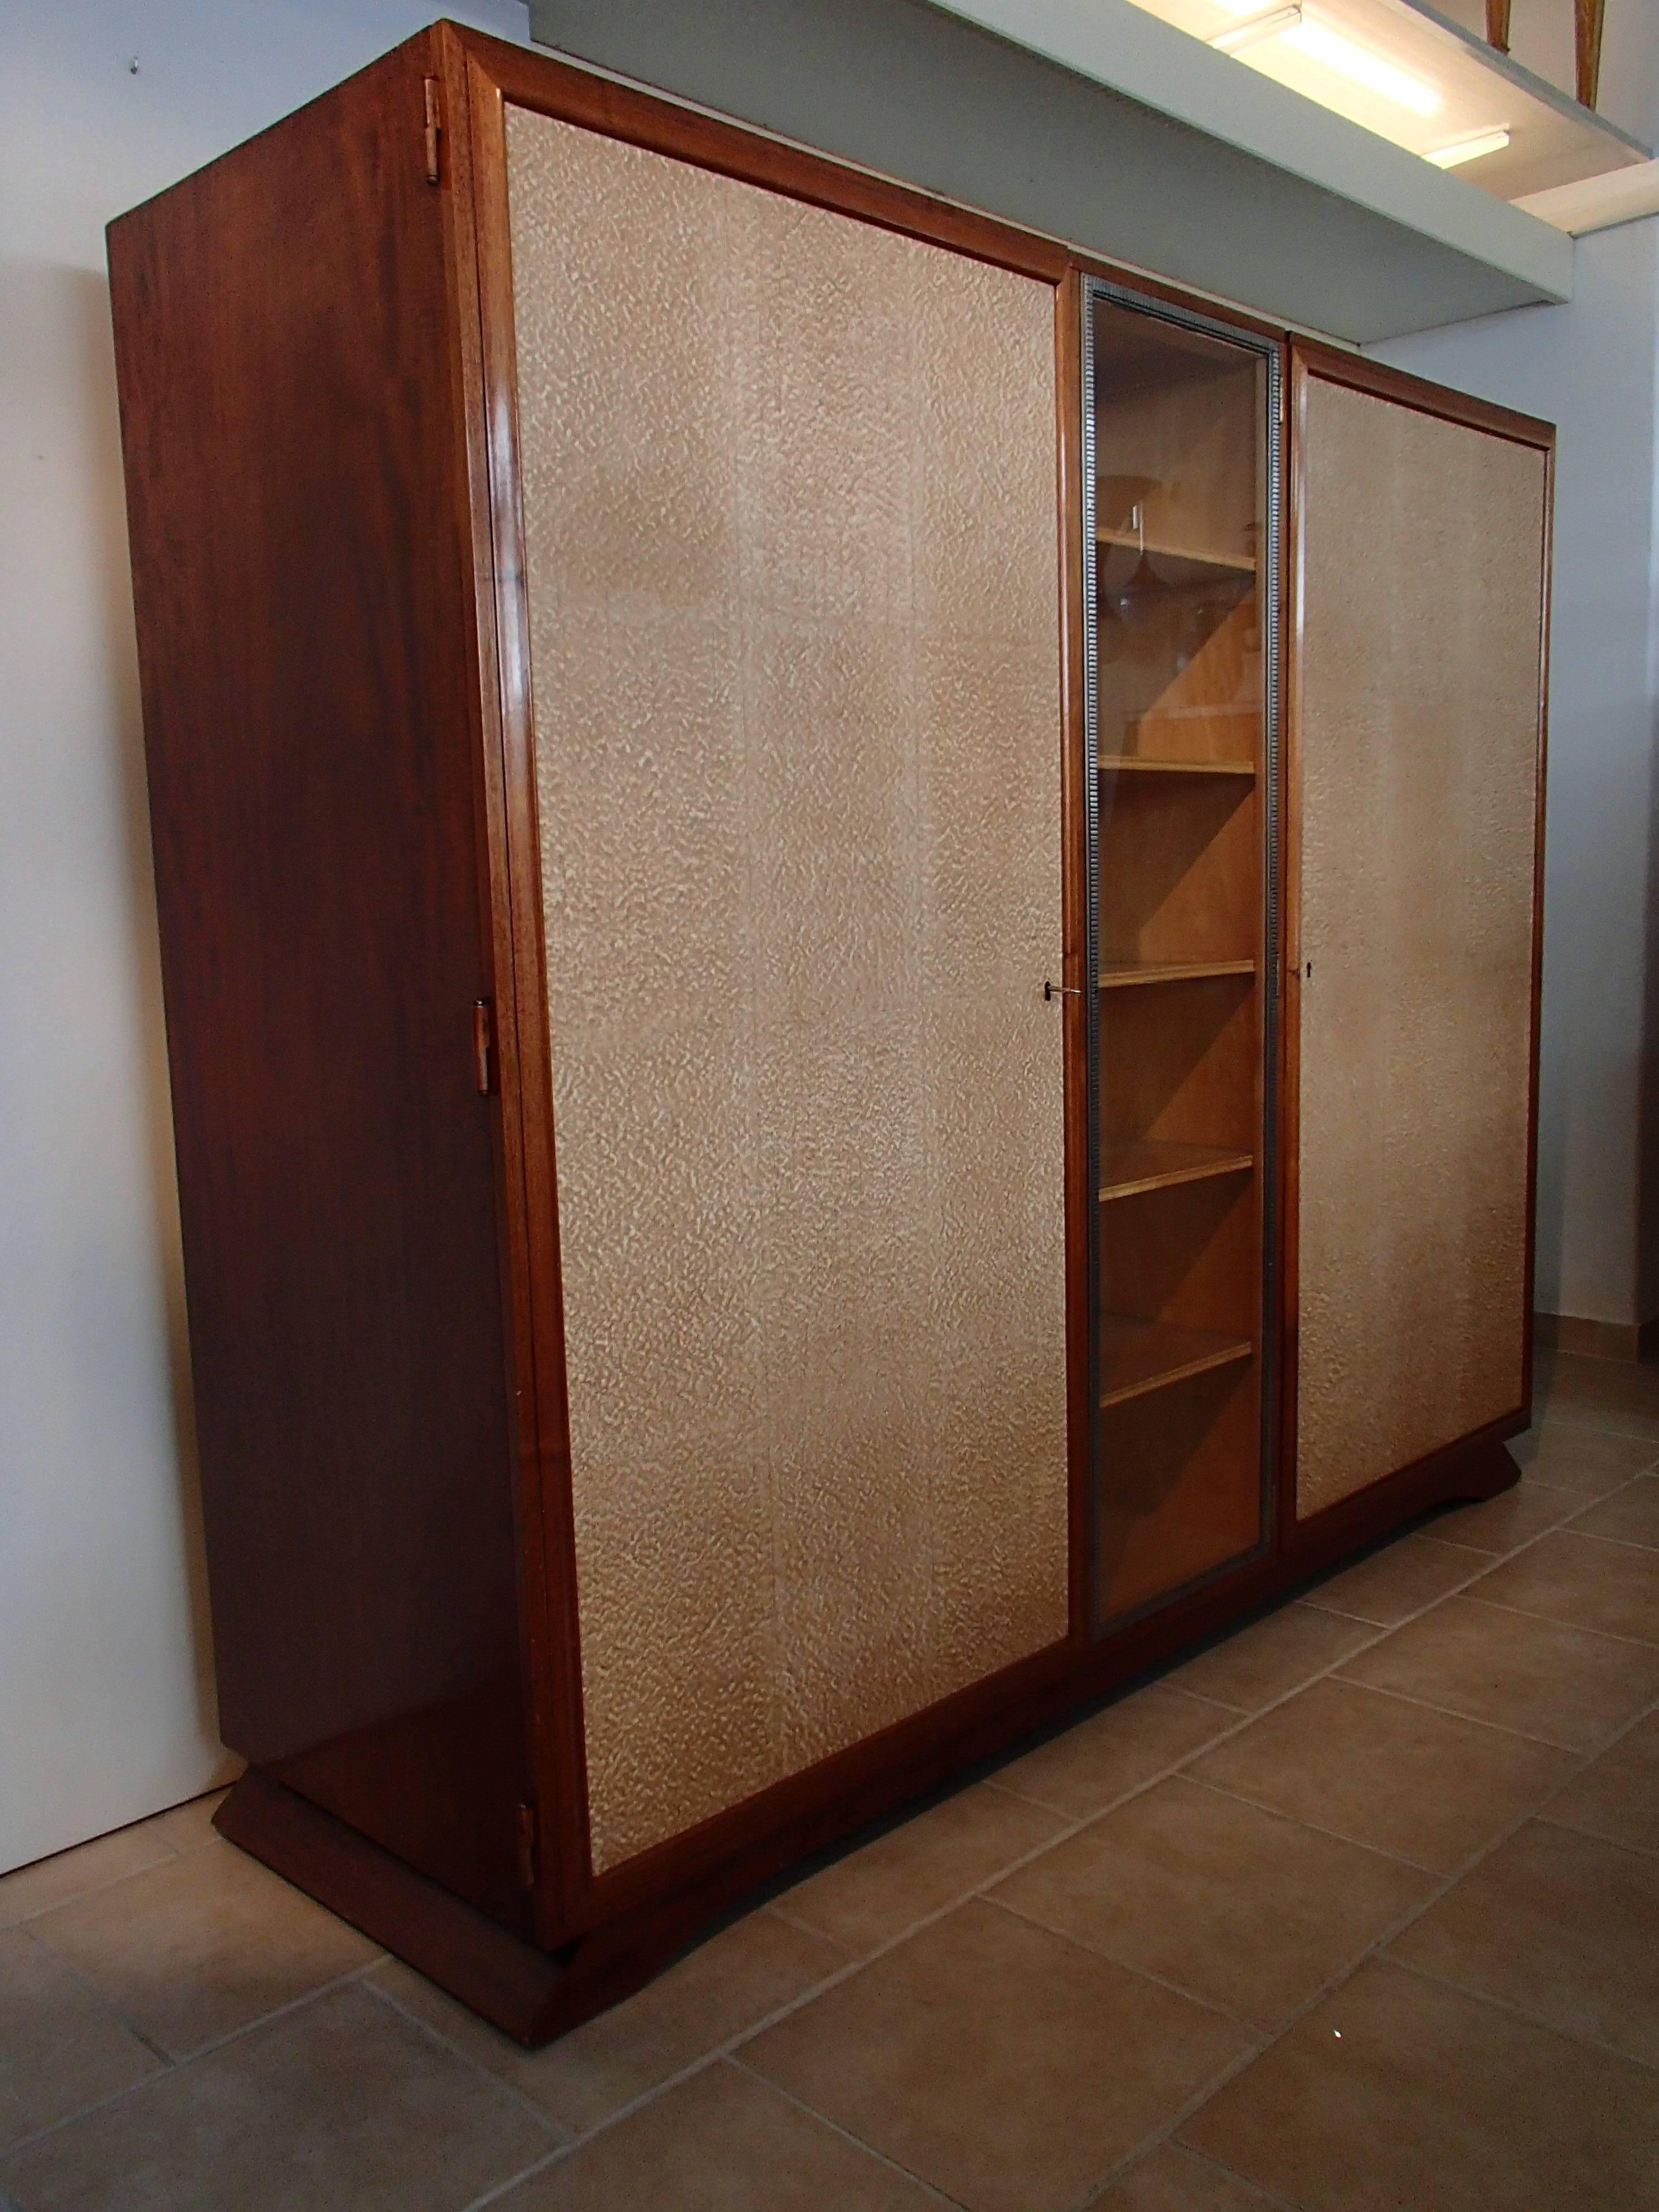 Art Deco Wardrobe full mahogany with pergament like doors and wrought iron 
restored. Can be dismantled for transport.